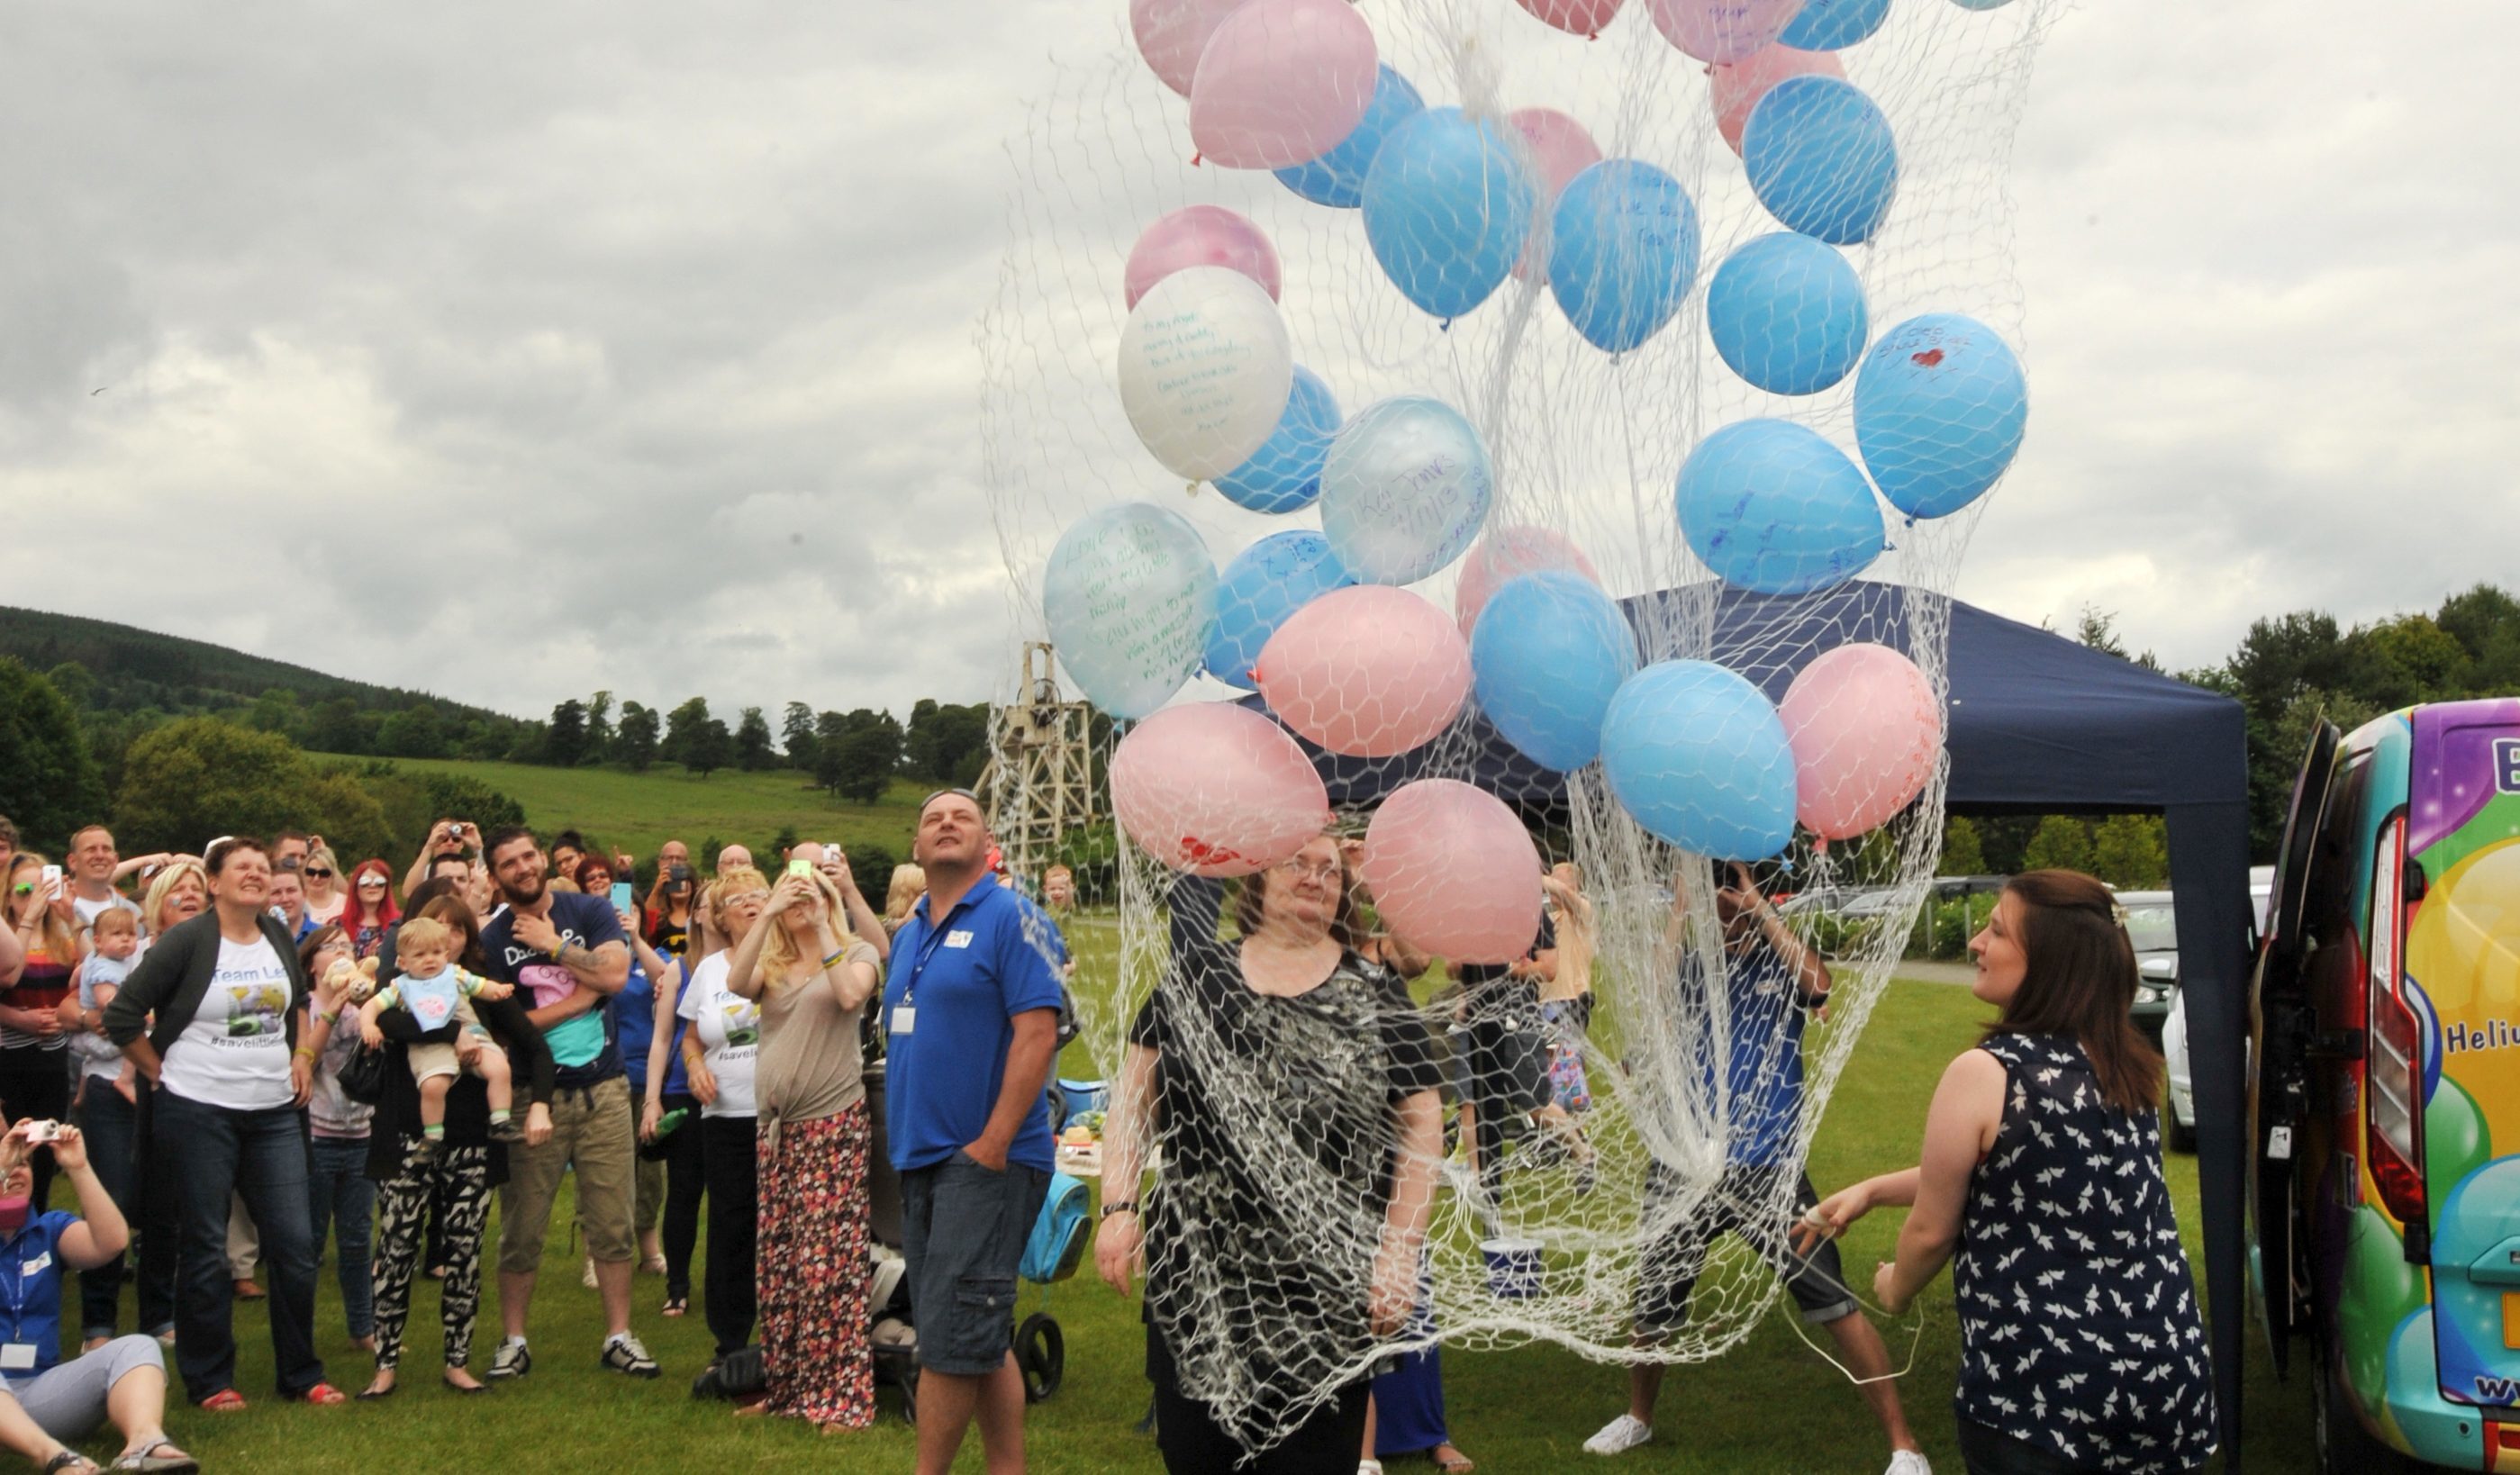 The balloon release at Lochore Meadows Country Park was always a special event.